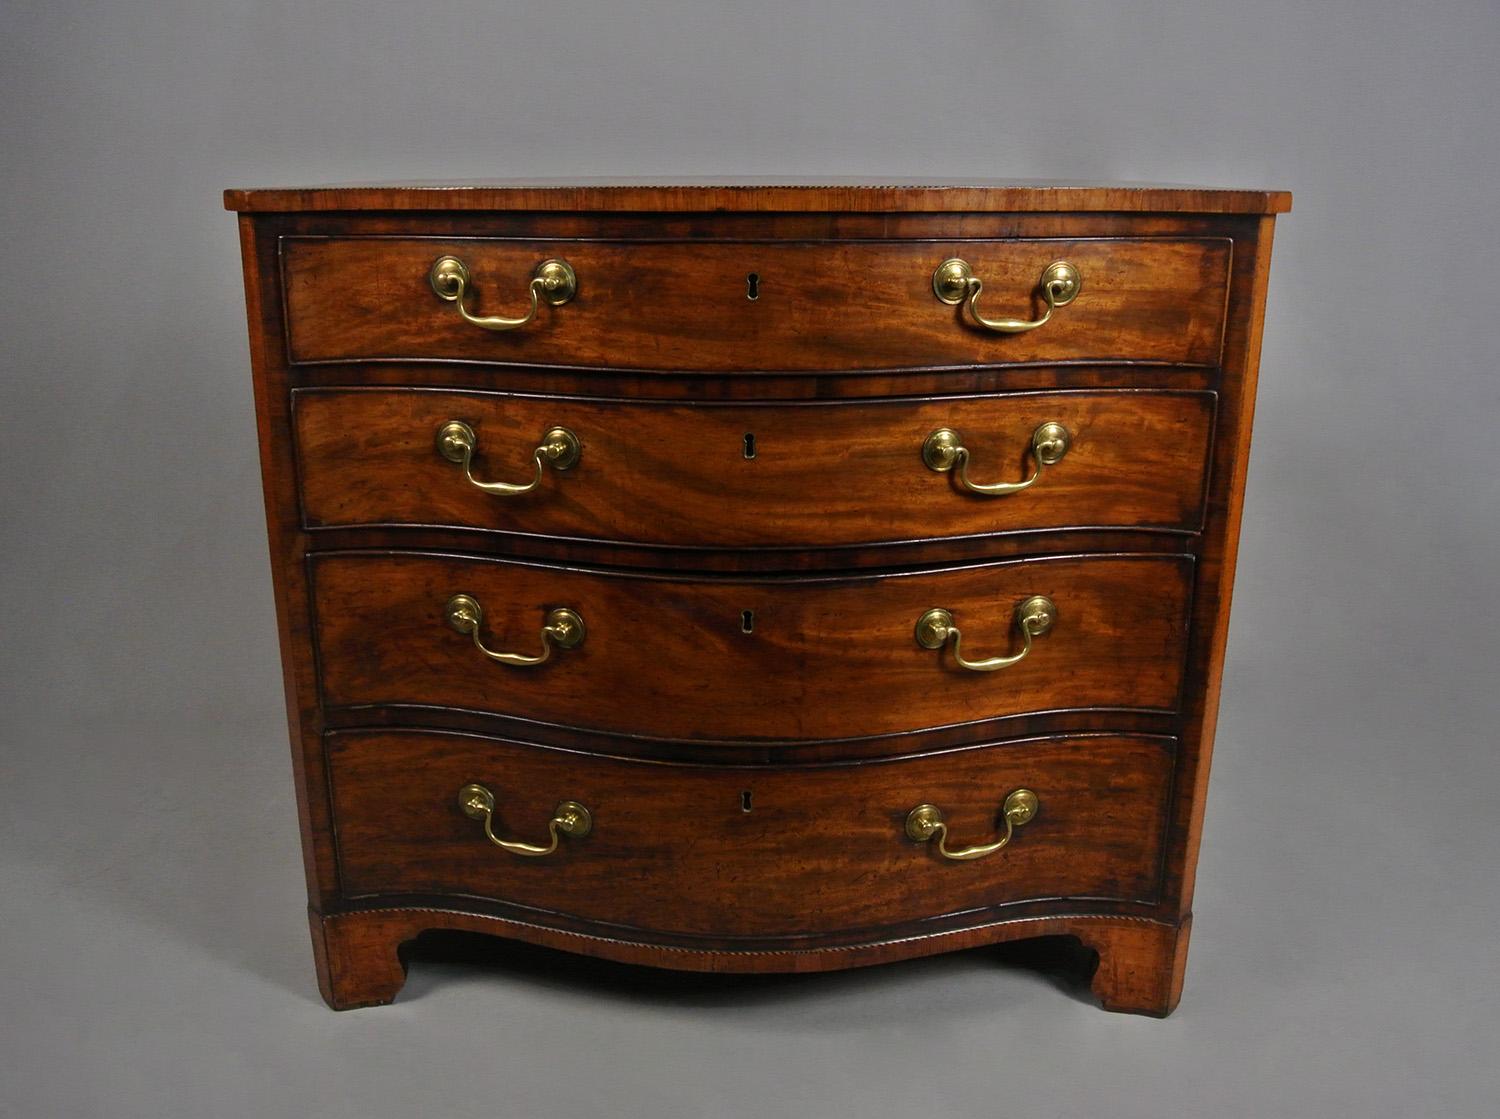 Of exceptional refinement and quality, this beautiful small serpentine chest carries all of the hallmarks of a superb maker and dates from c. 1770.   

With a fantastic natural and well developed colour and deep patina throughout.  The single board